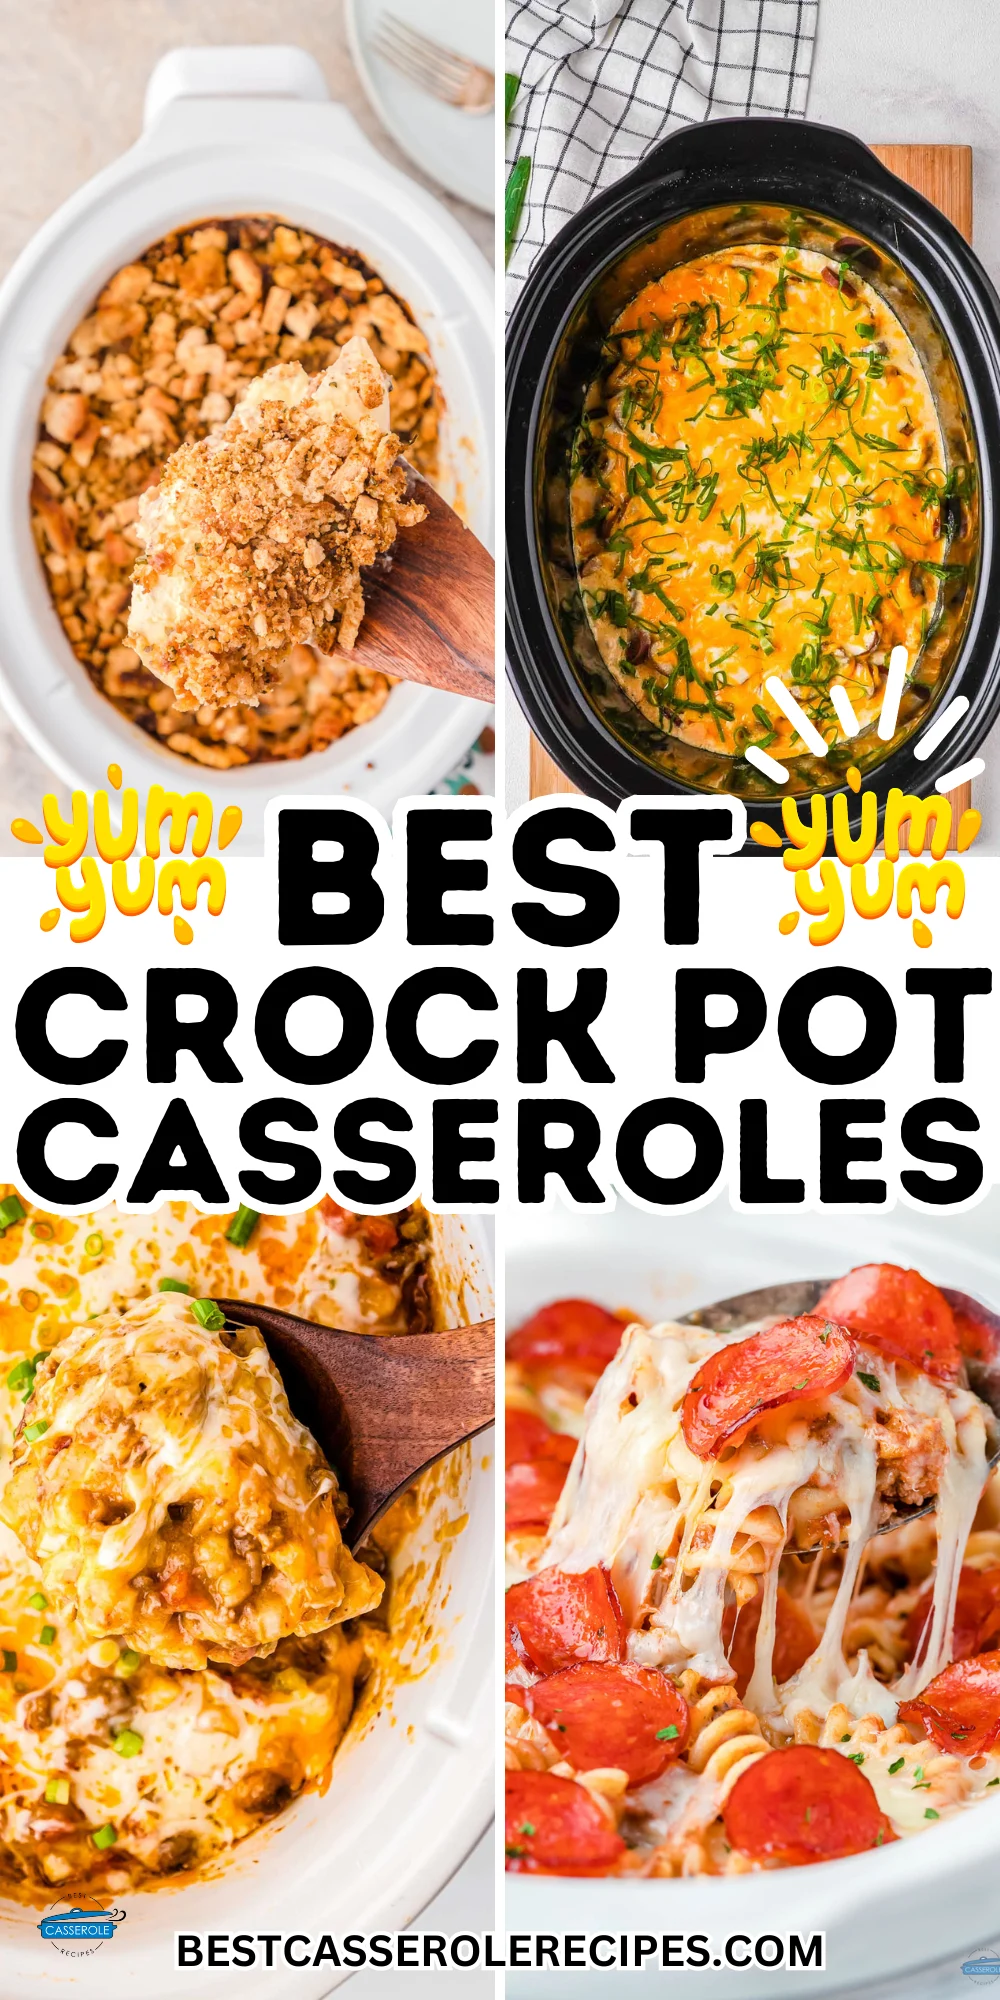 best crcokpot casserole recipes the family will actually eat!